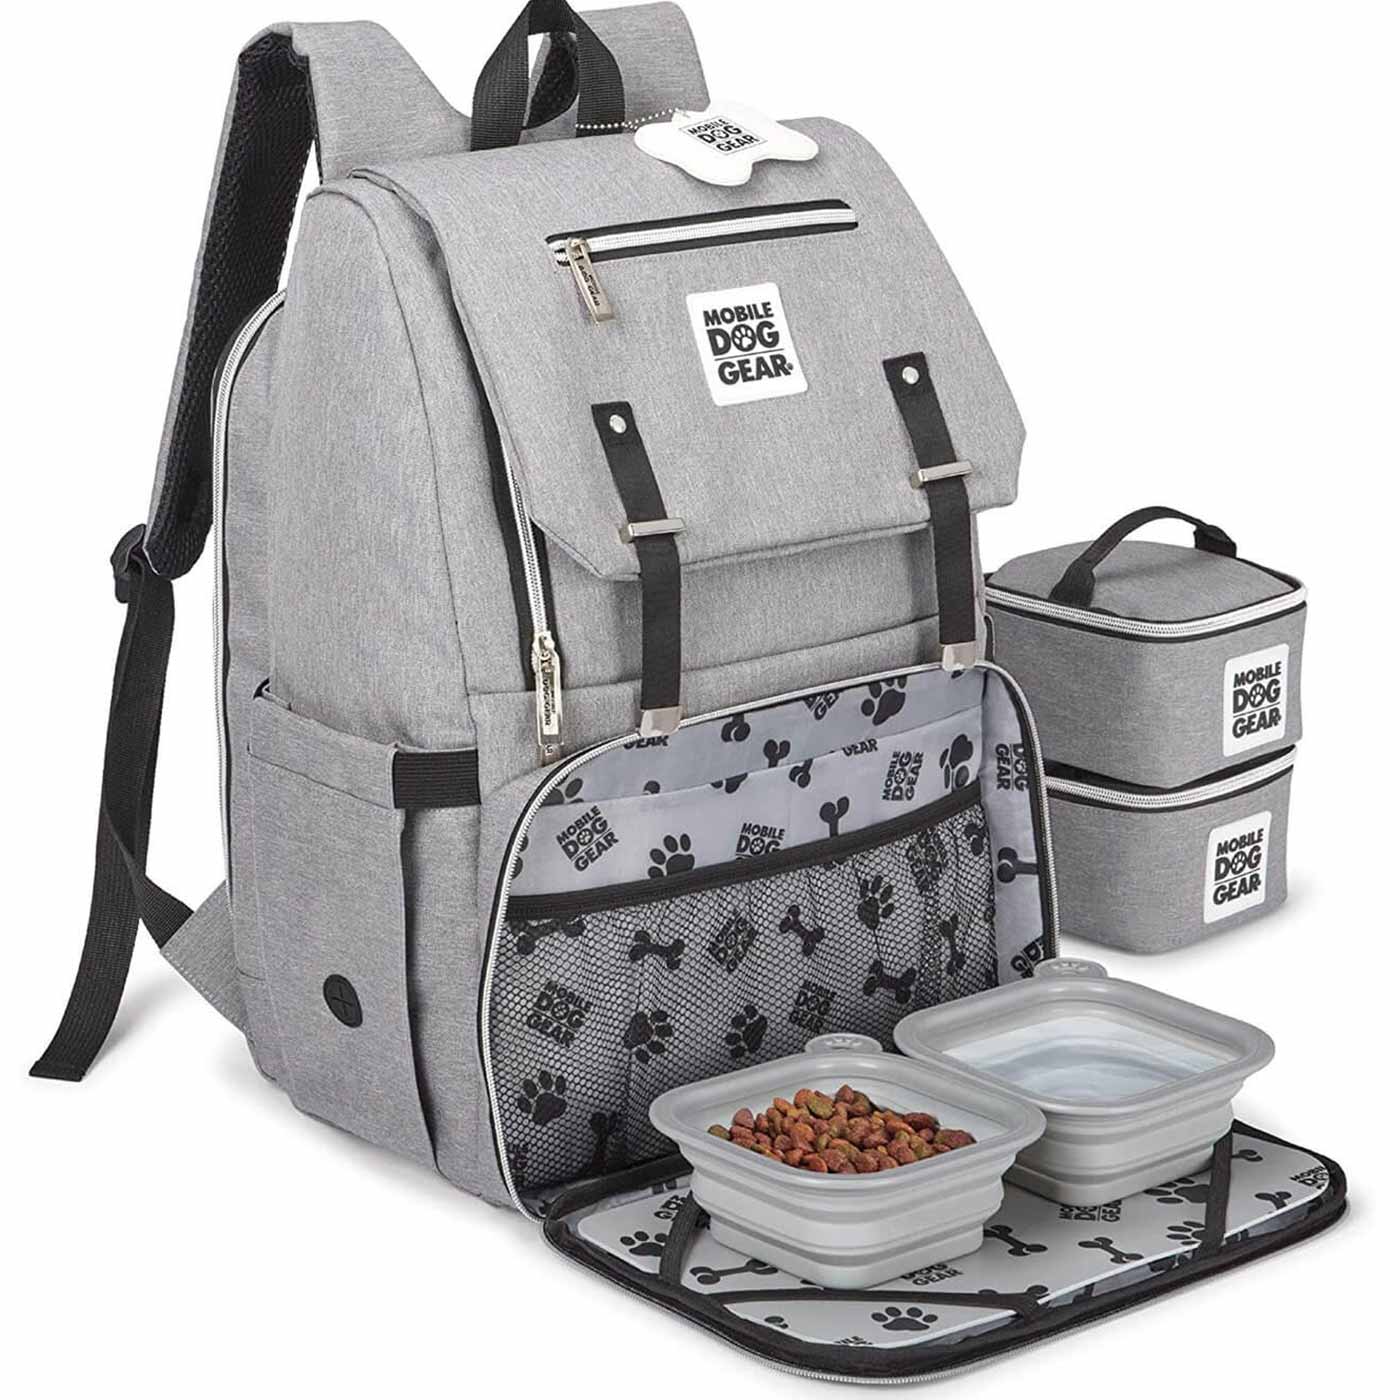 Discover, Mobile Dog Gear Week Away Backpack, in Grey. The Perfect Away Bag for any Pet Parent, Featuring dividers to stack food and built in waste bag dispenser. Also Included feeding set, collapsible silicone bowls and placemat! The Perfect Gift For travel, meets airline requirements. Available Now at Lords & Labradors